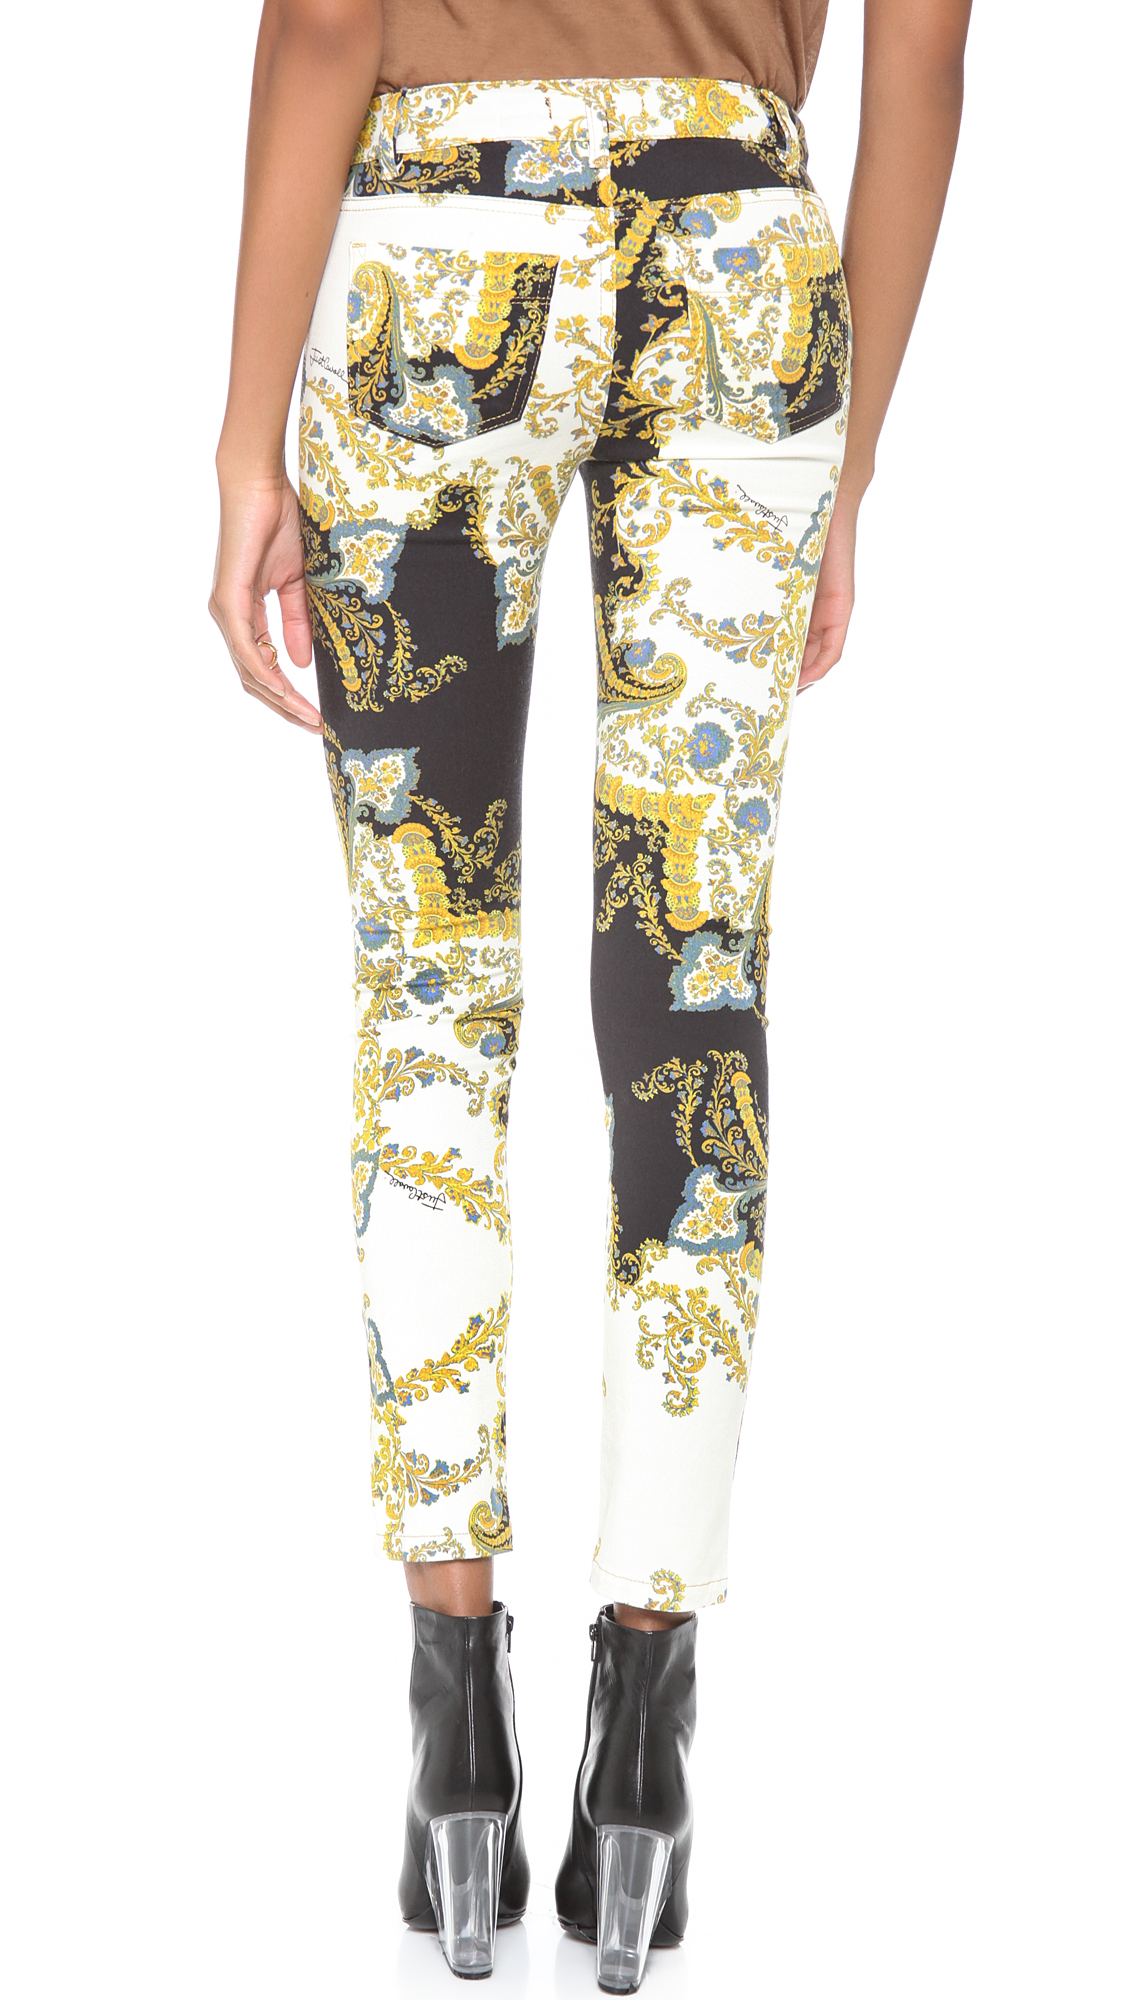 Lyst - Just Cavalli Printed Skinny Jeans in Yellow